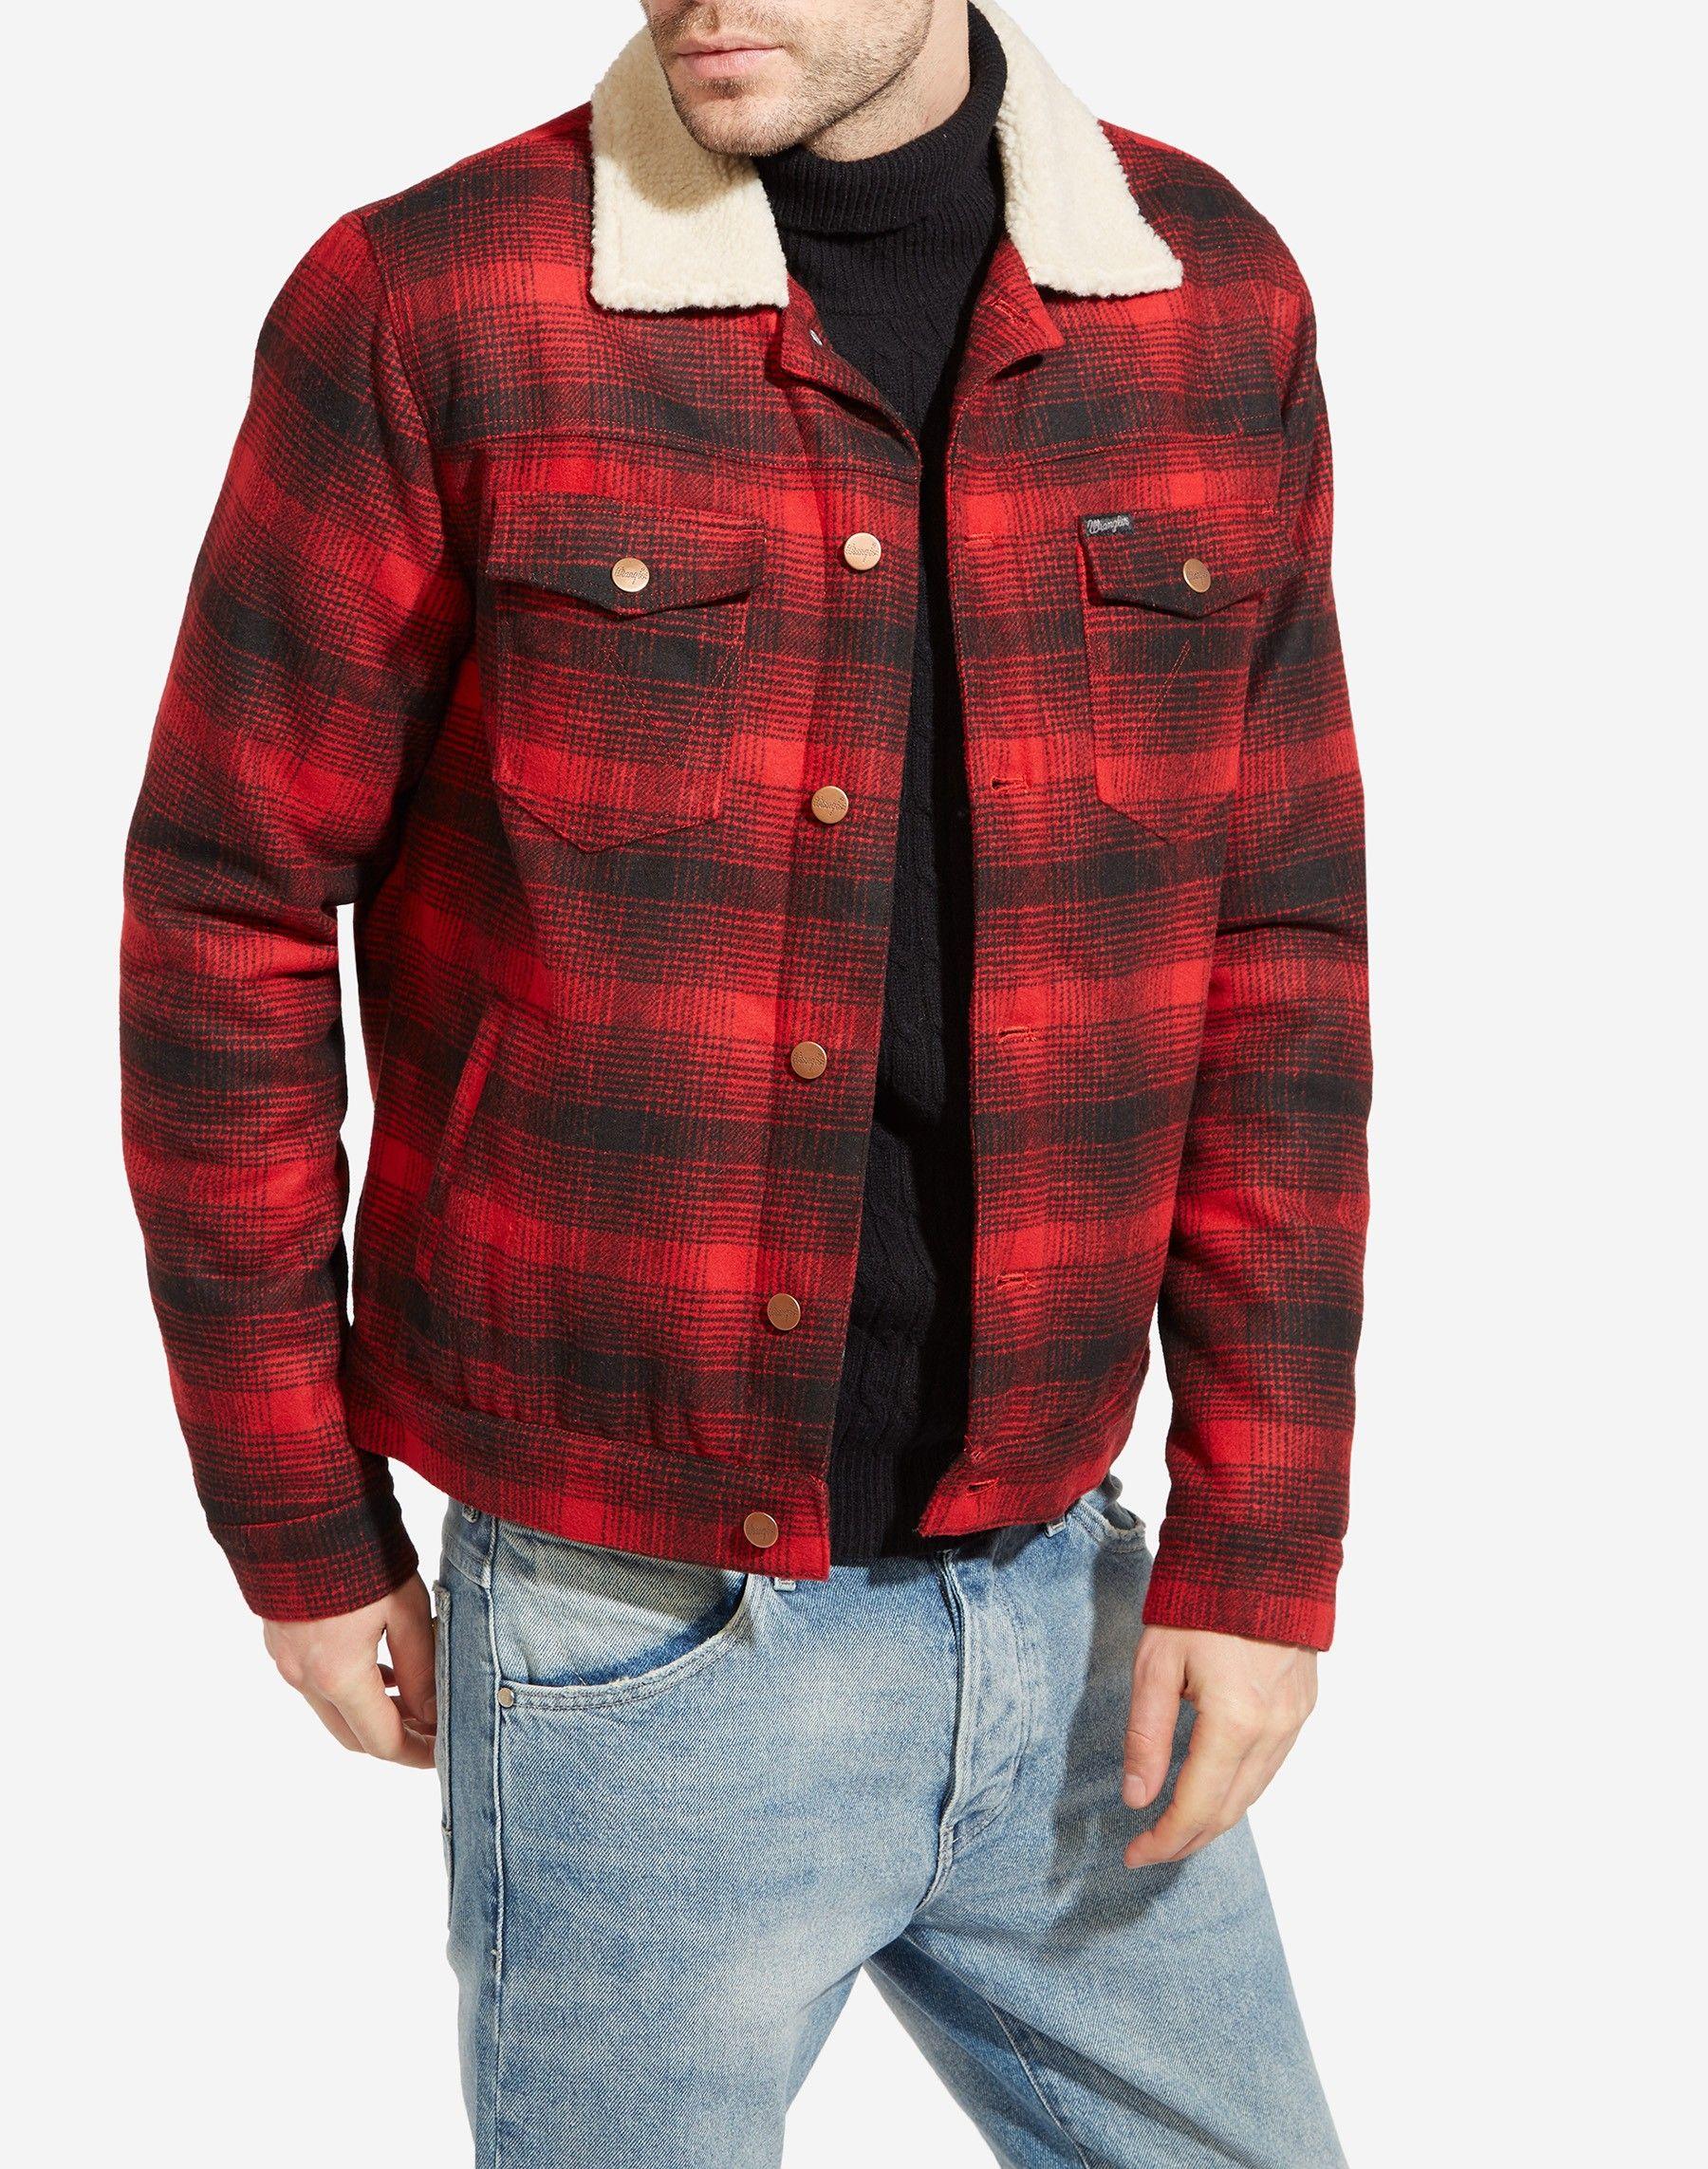 Red Check Clothing Logo - Wool Trucker & Clothing